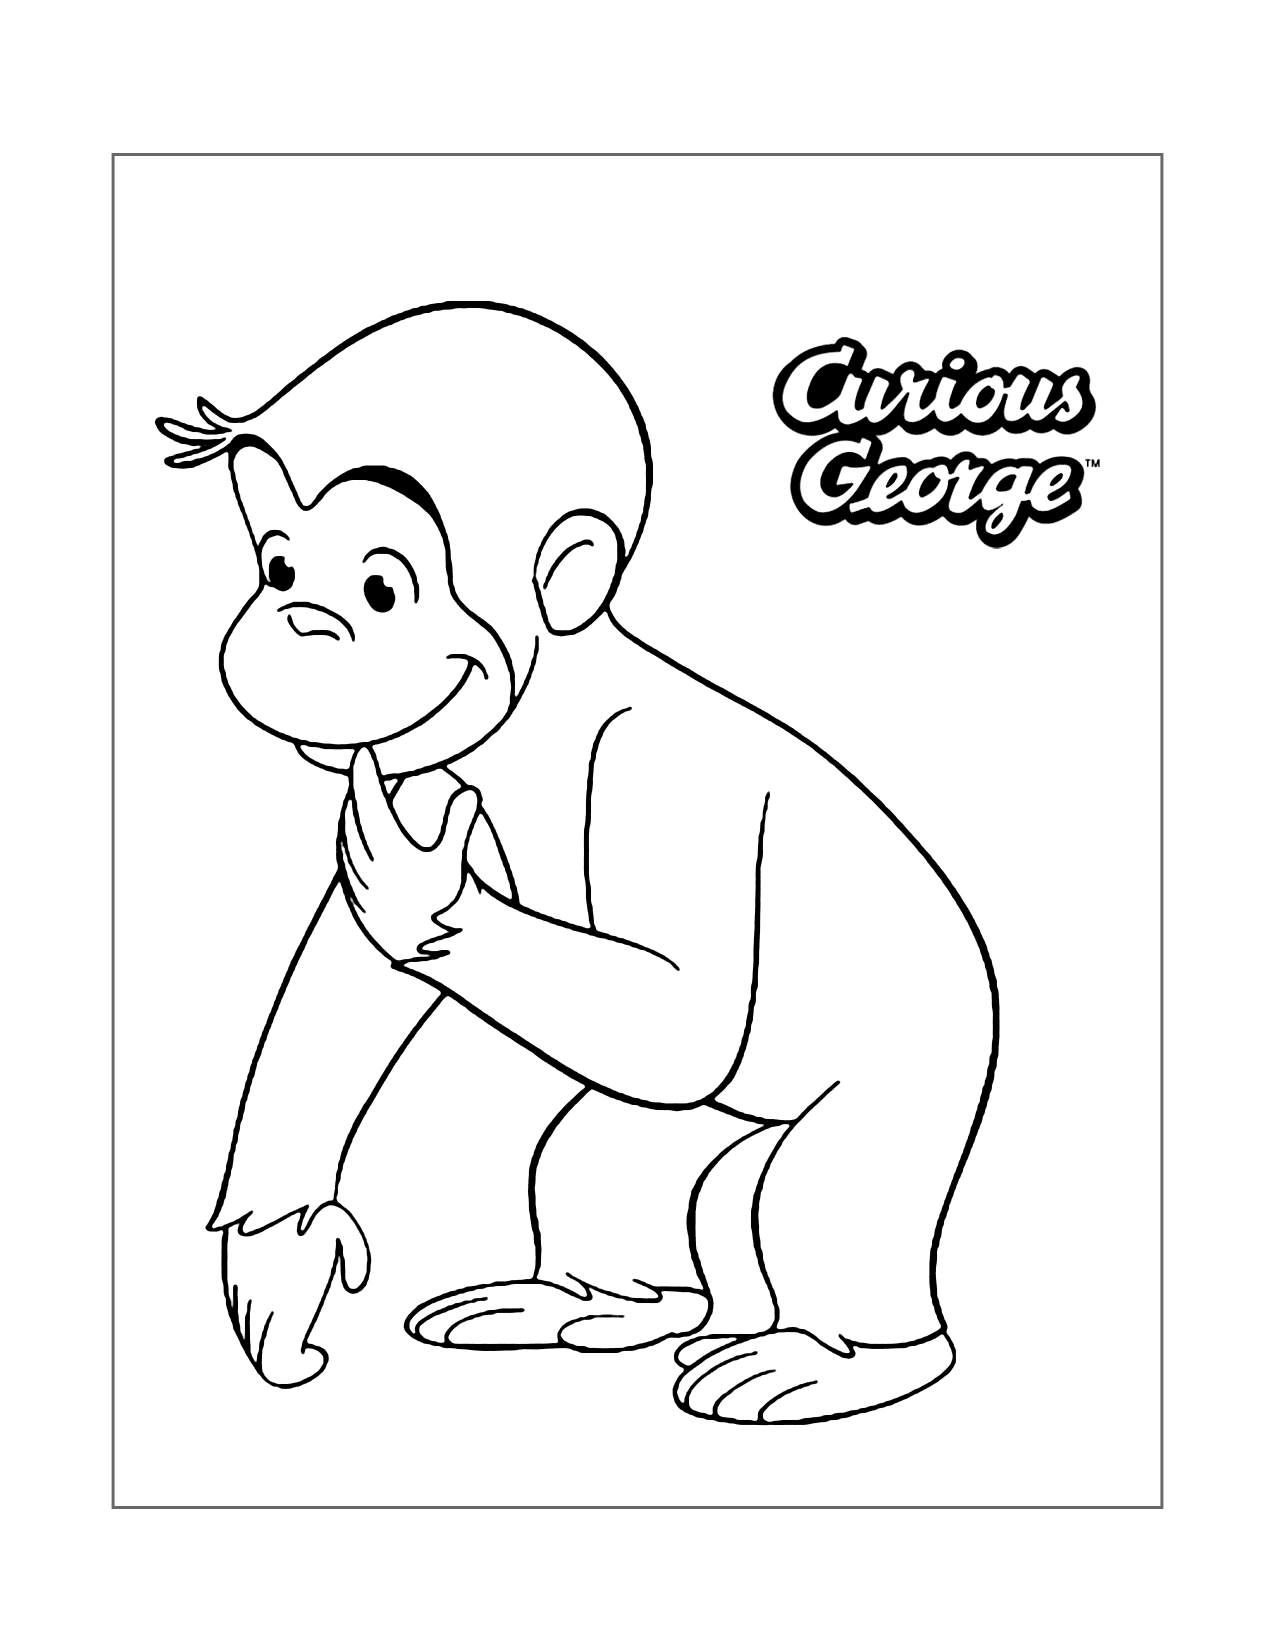 Cute Curious George Coloring Page